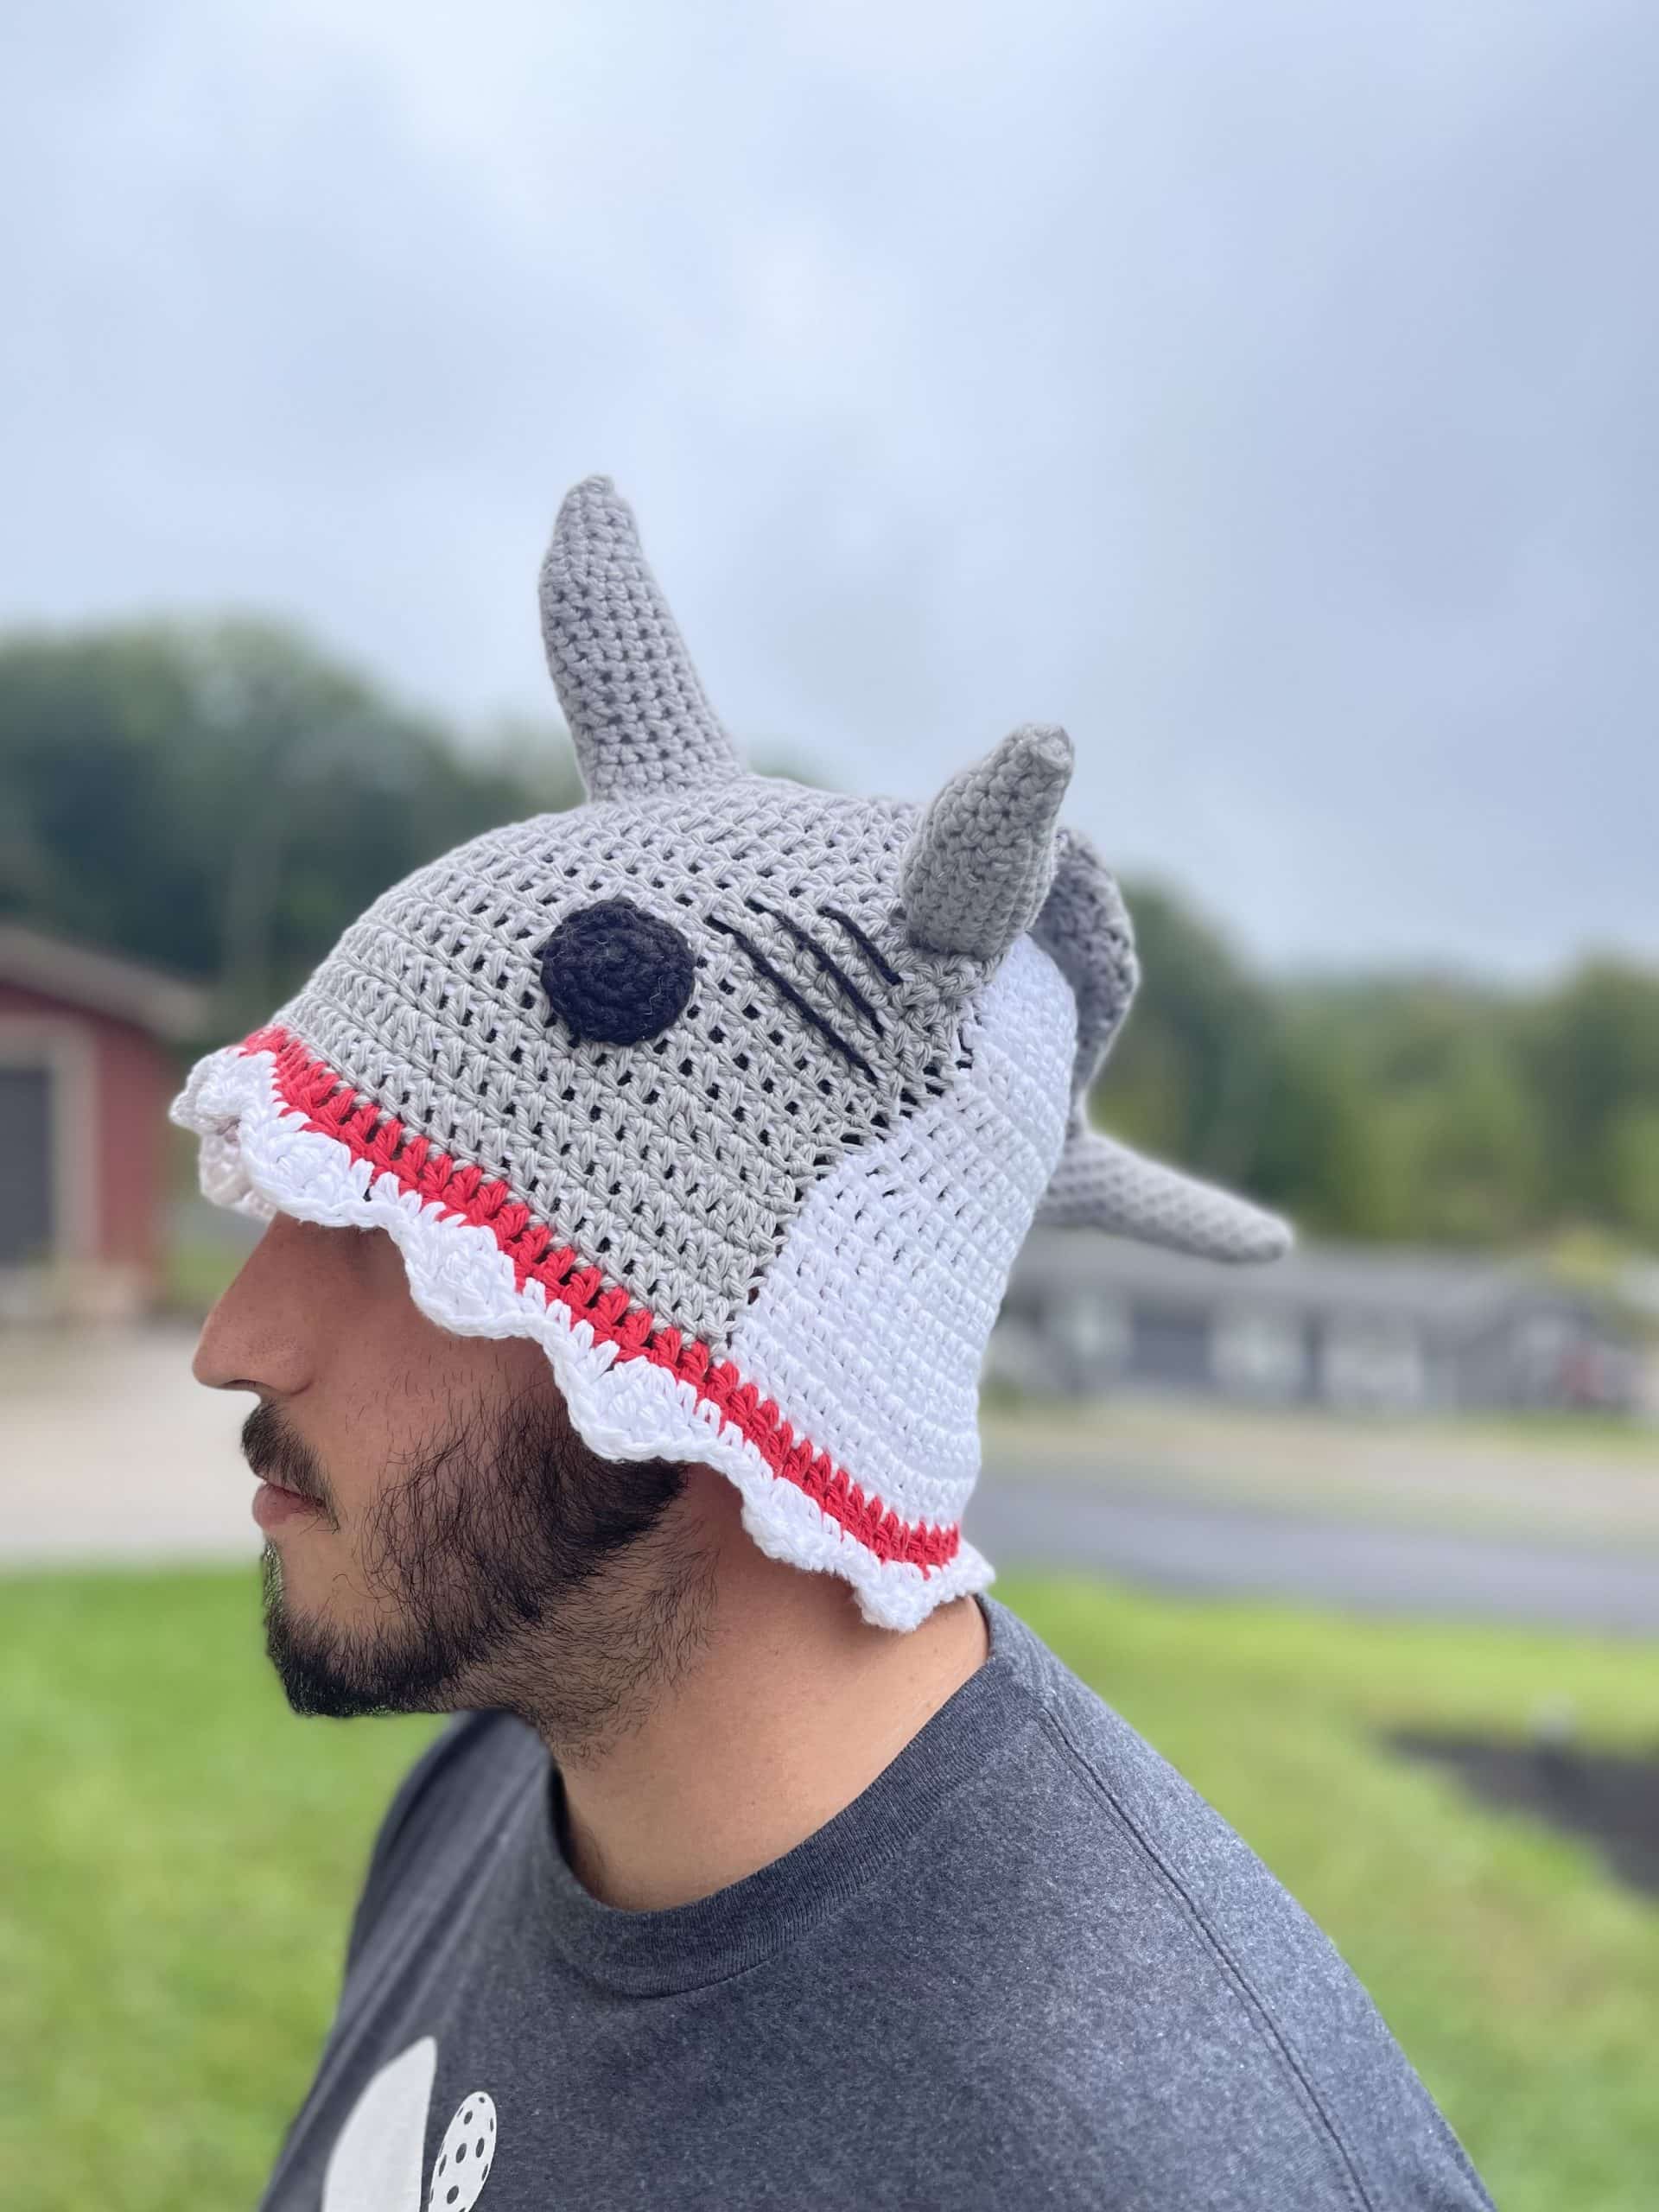 shark hat on head side view no tail stuffing